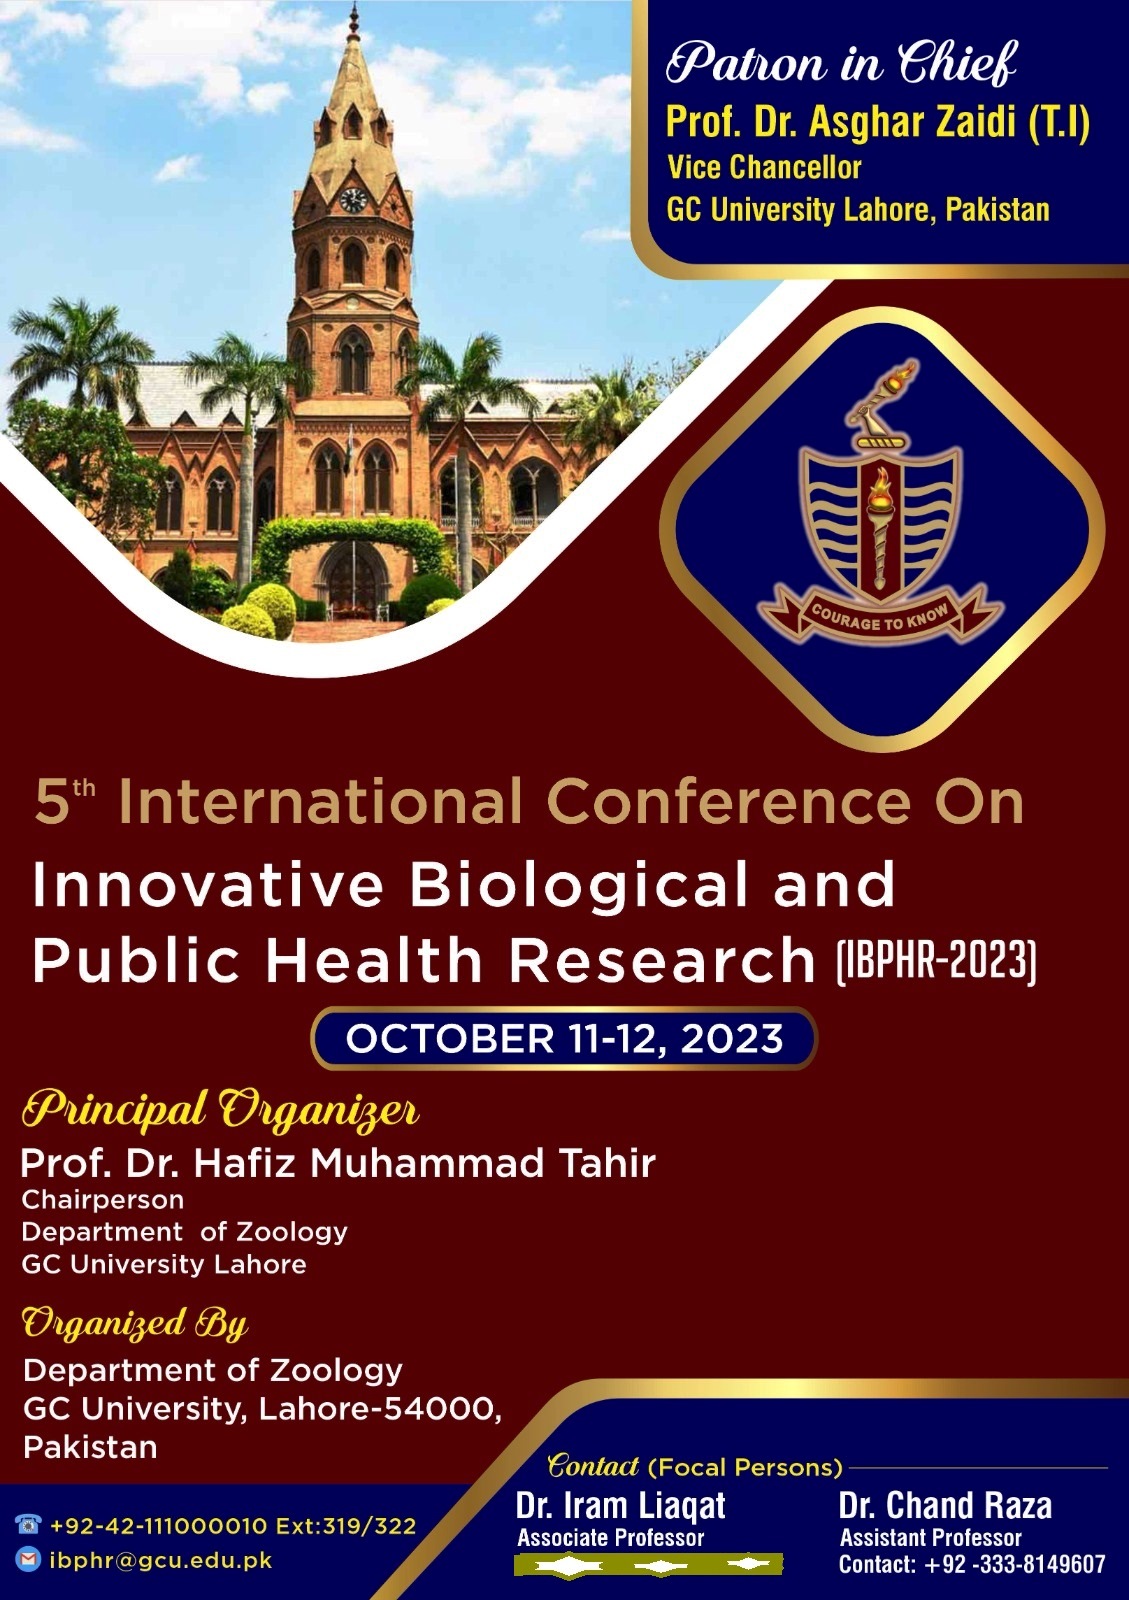 5th International Conference on Innovative Biological and Public Health Research (IBPHR-2023)